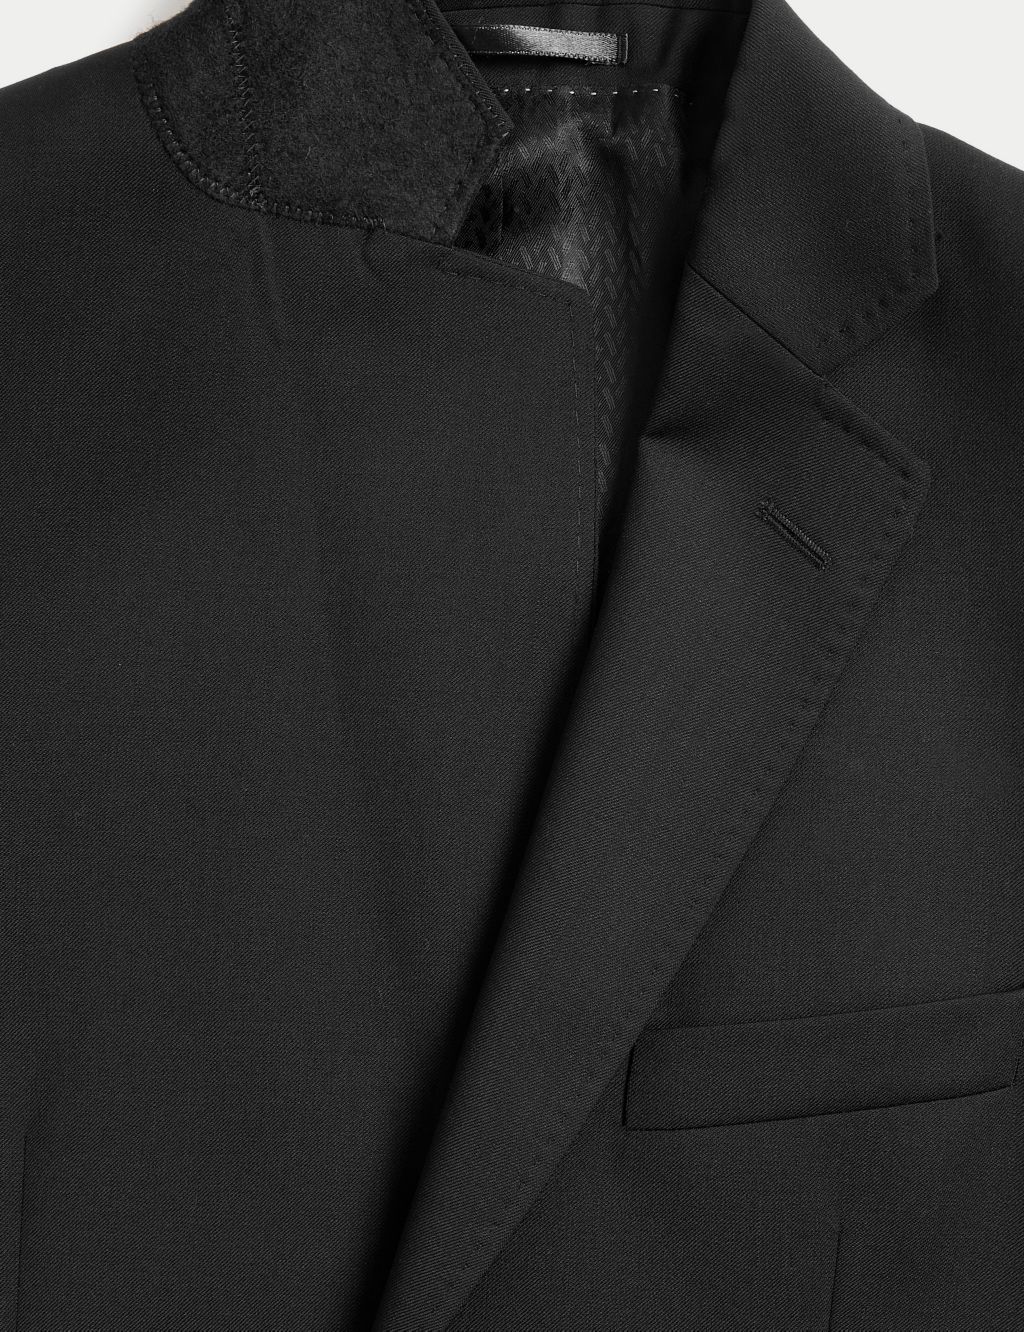 Tailored Fit Pure Wool Twill Jacket image 4